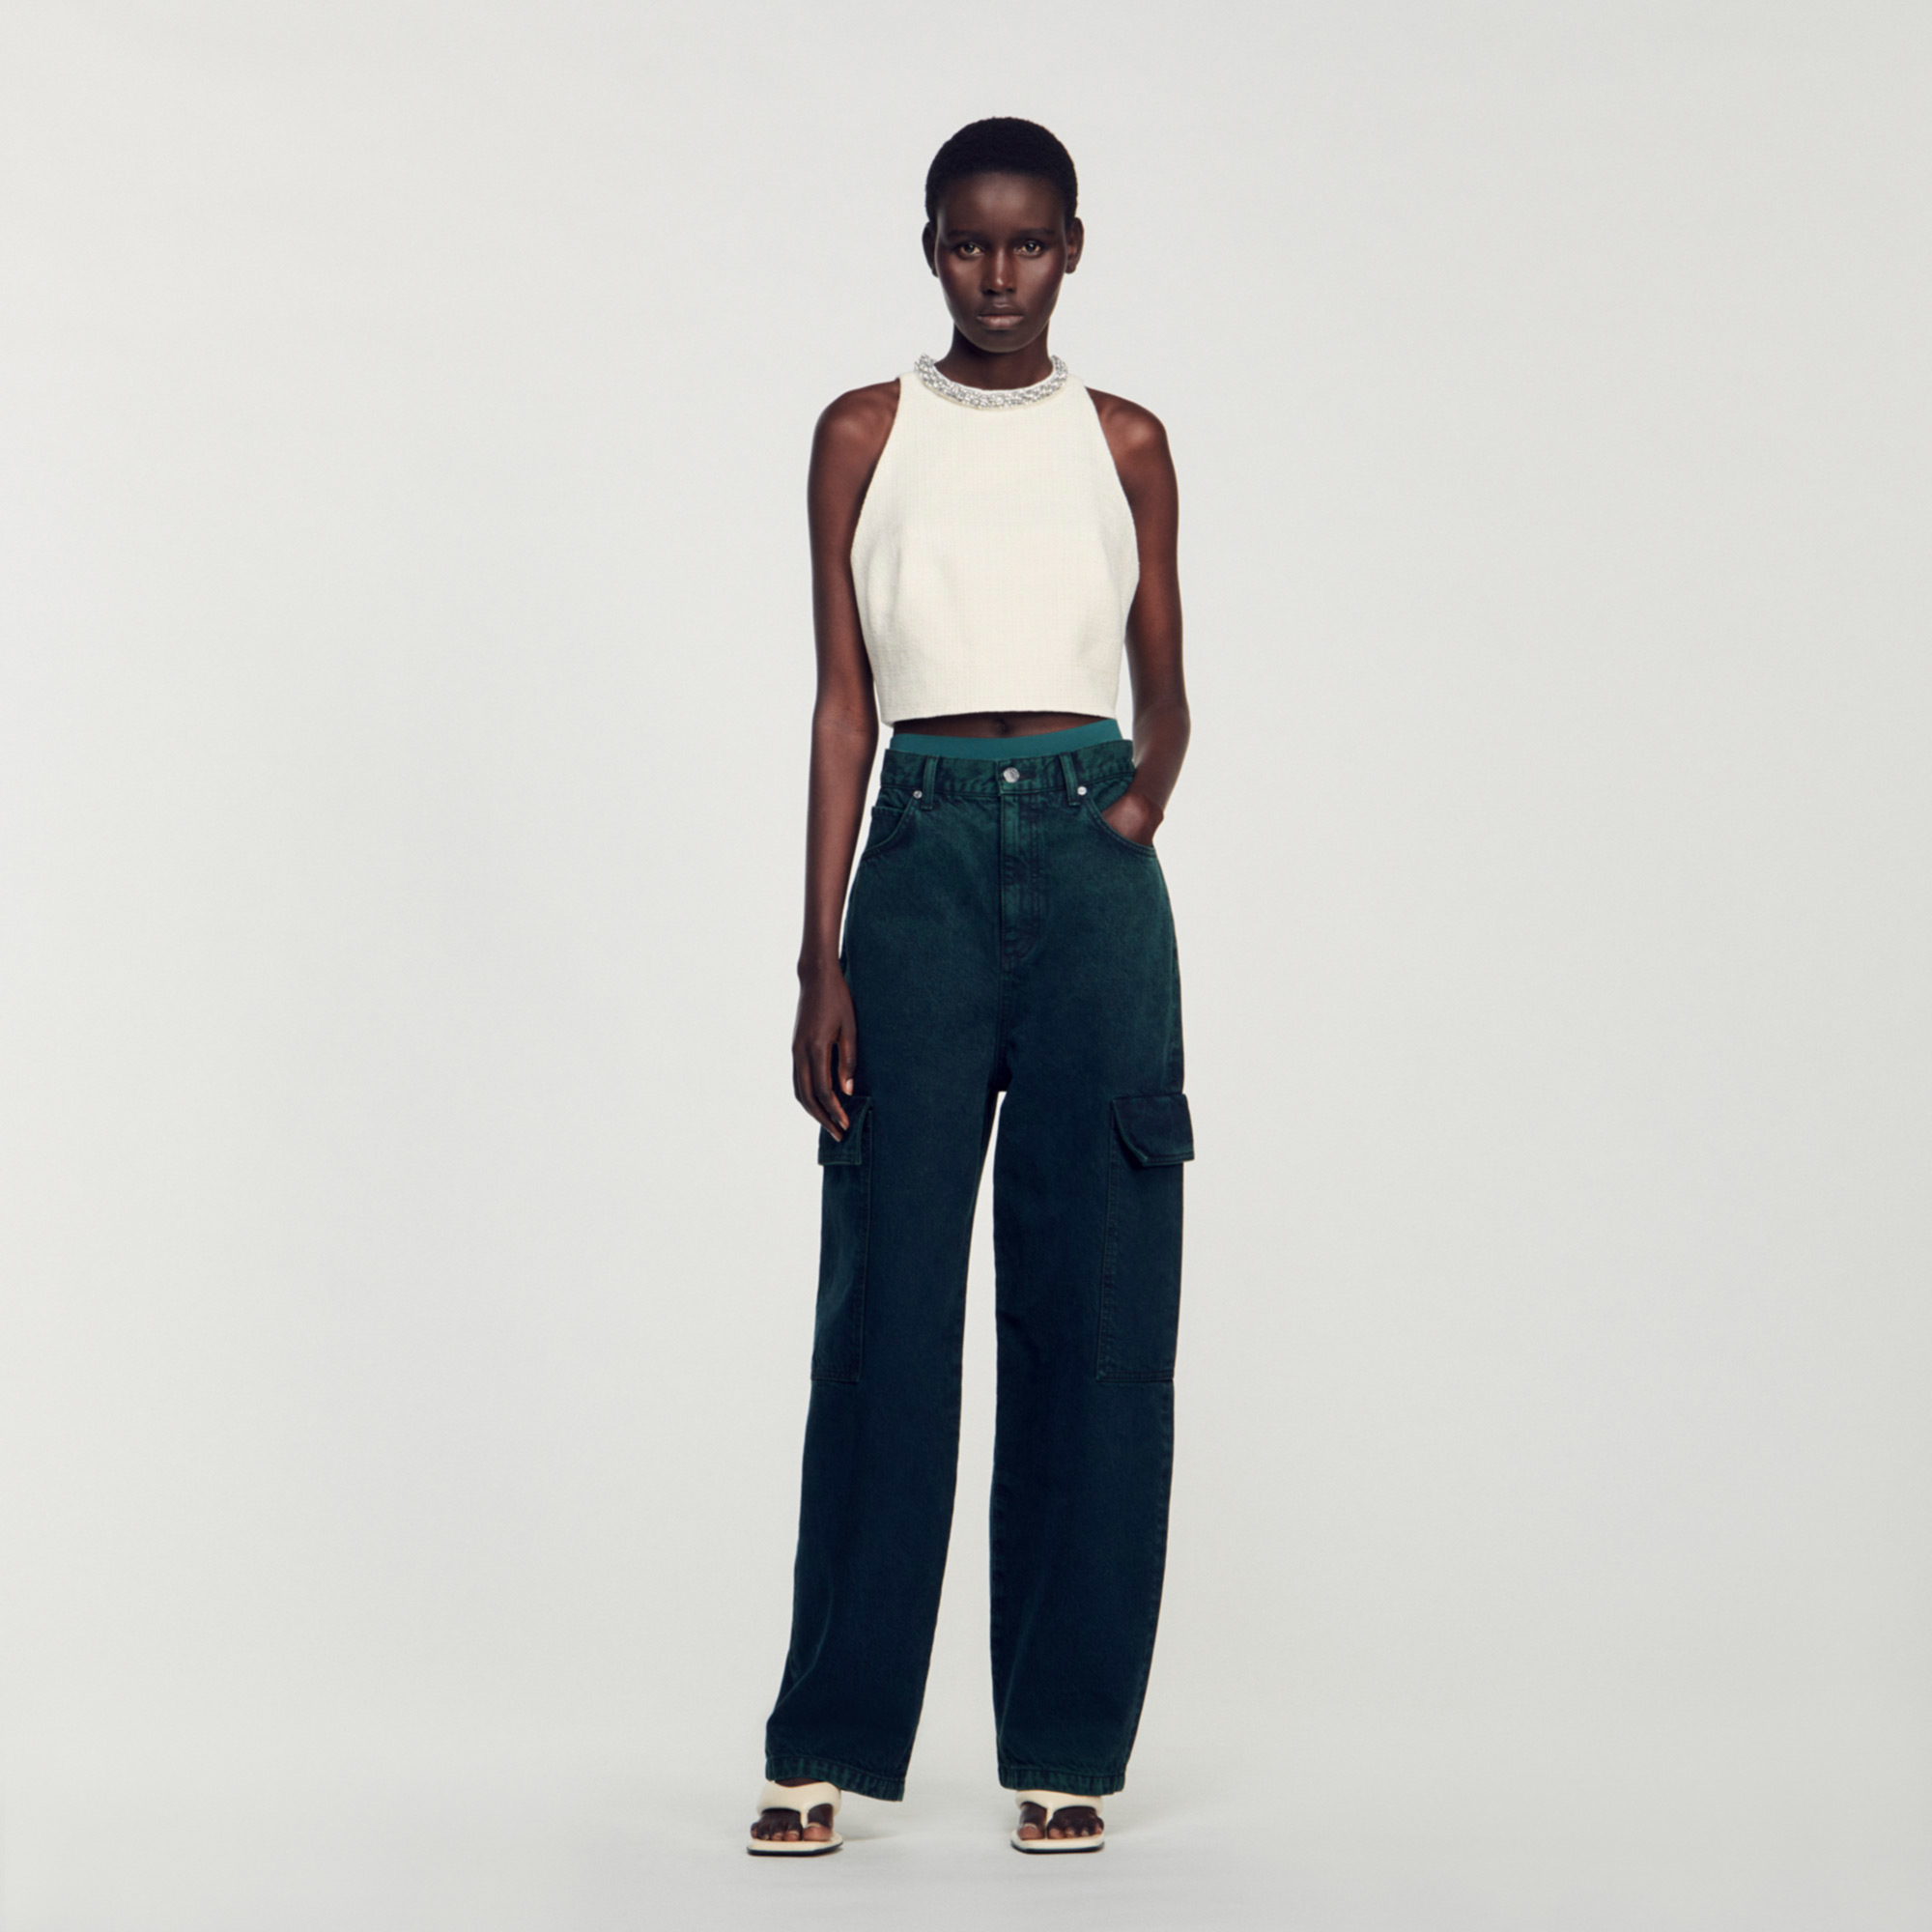 Sandro cotton Tweed crop top with jewelry collar embellished with rhinestones and American-style armholes